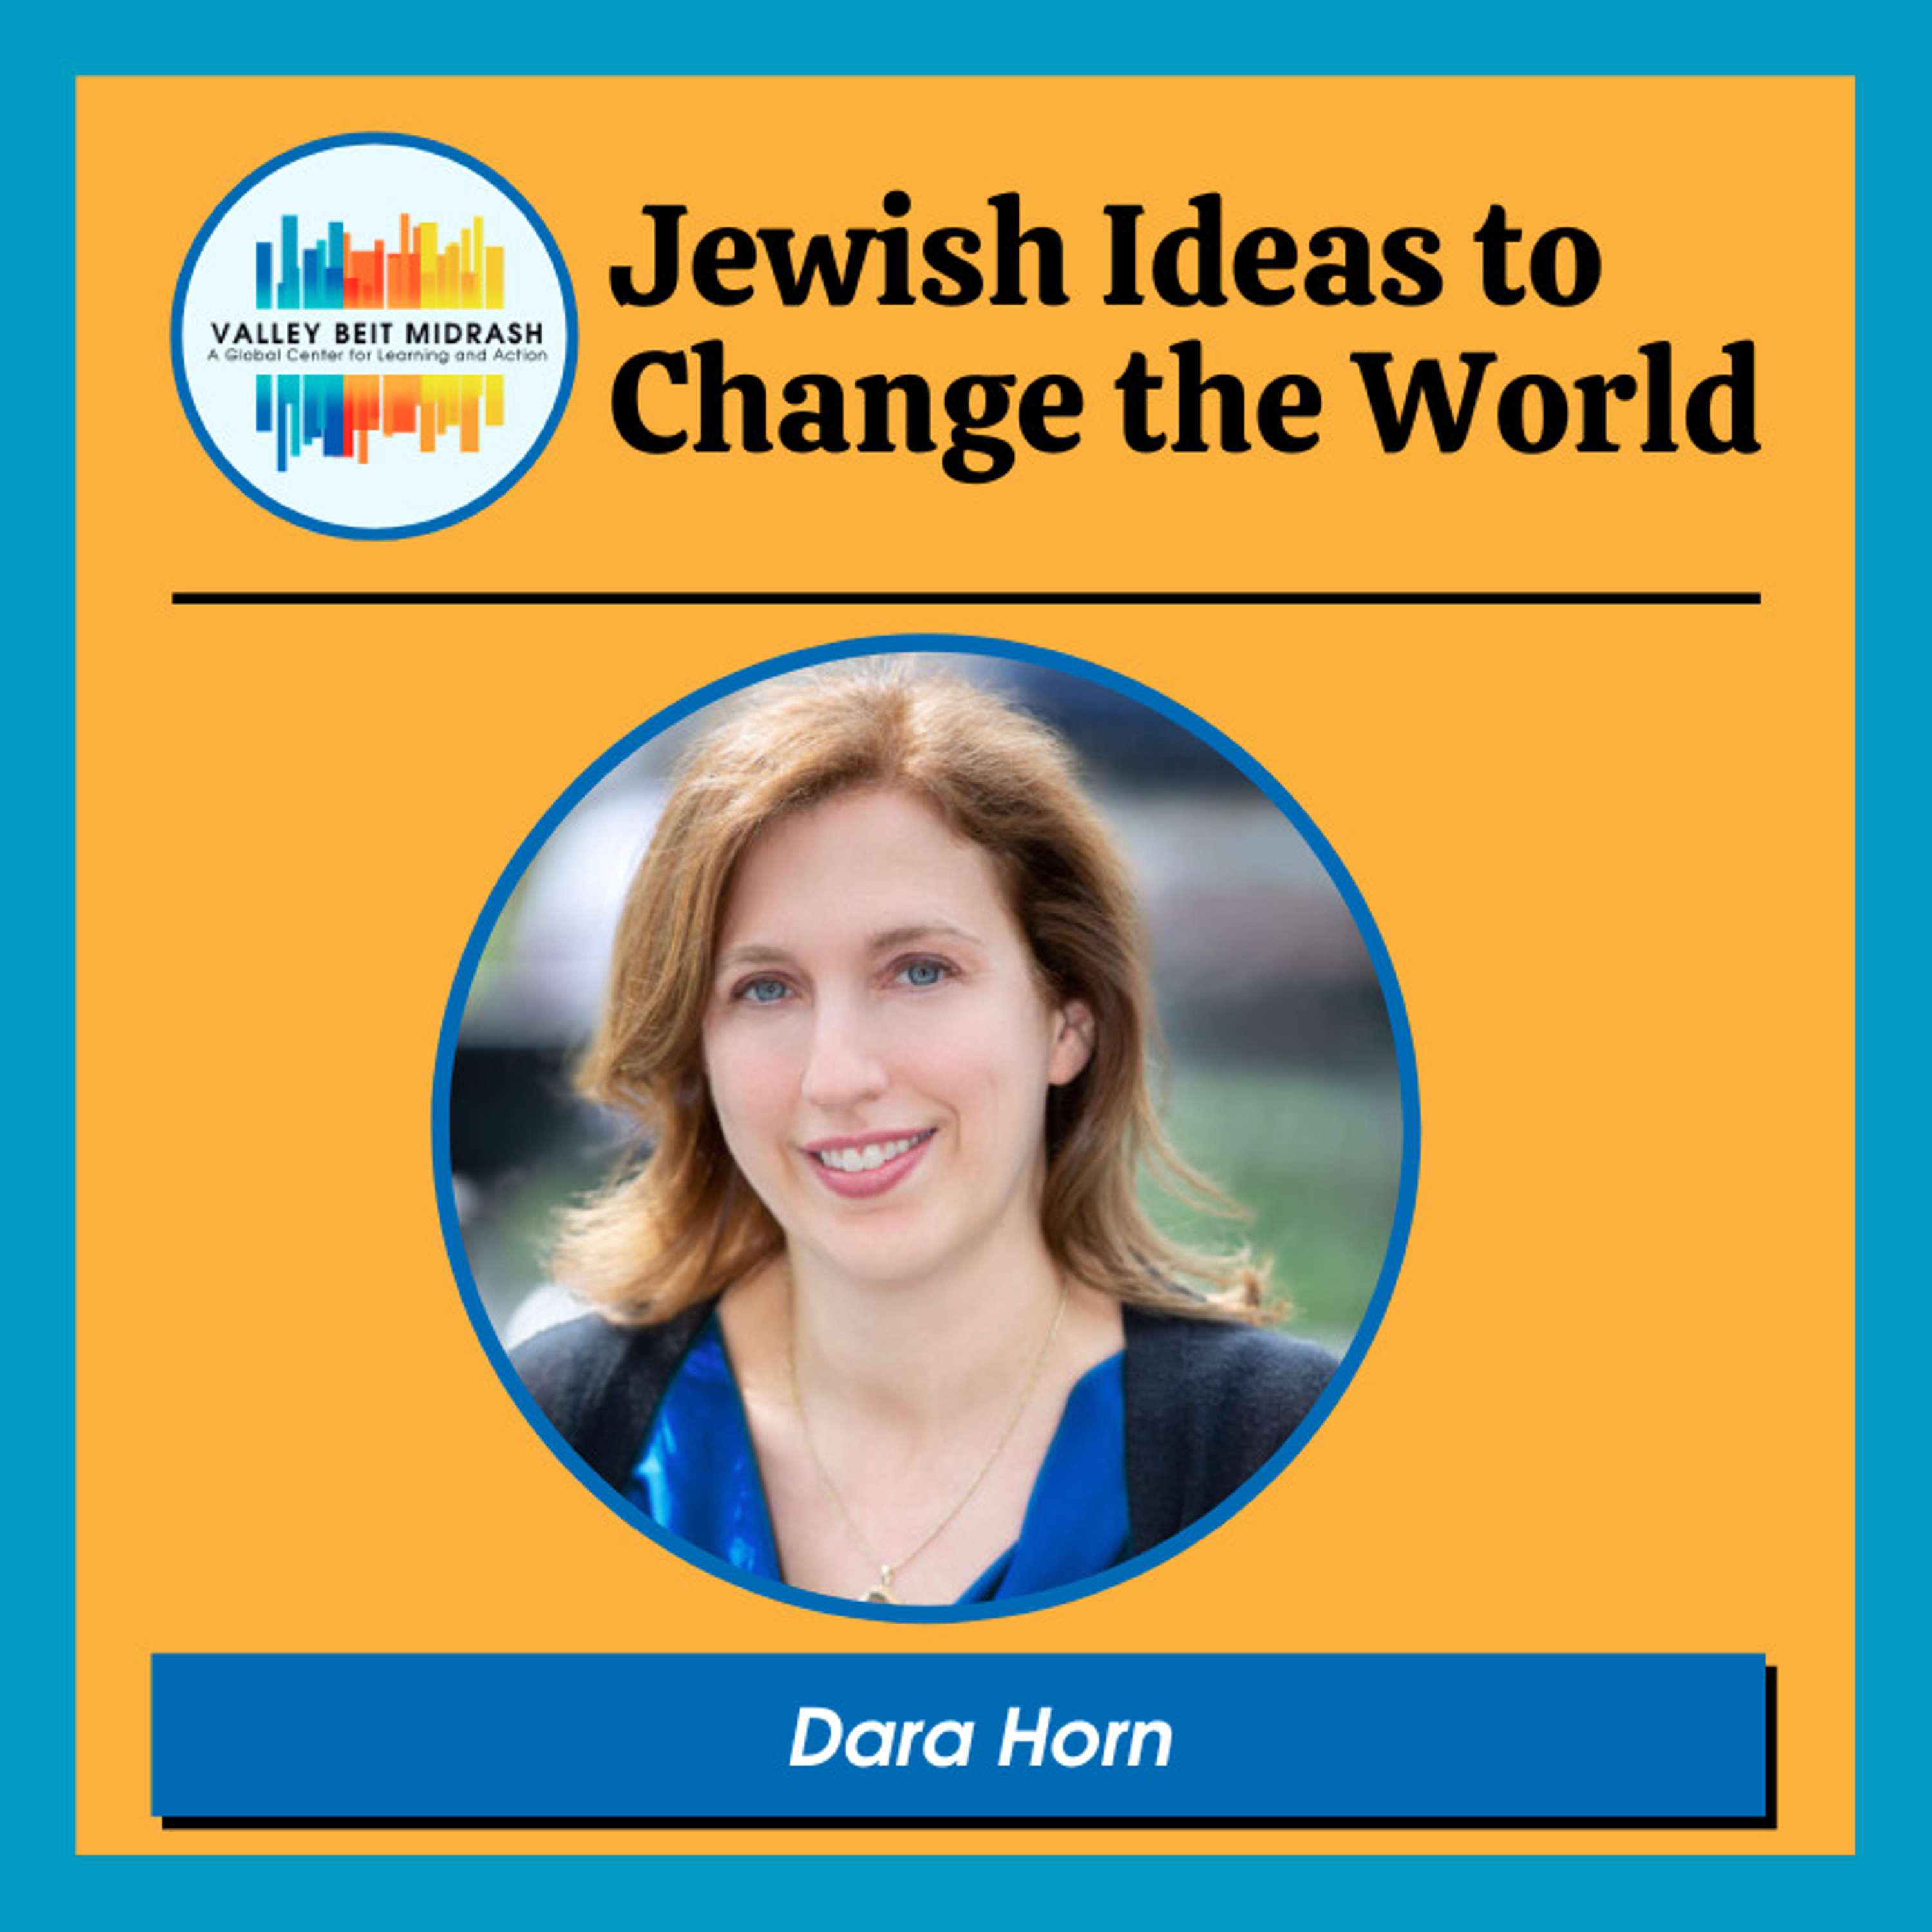 Rising Anti-Semitism on American Campuses: A Conversation with Dara Horn